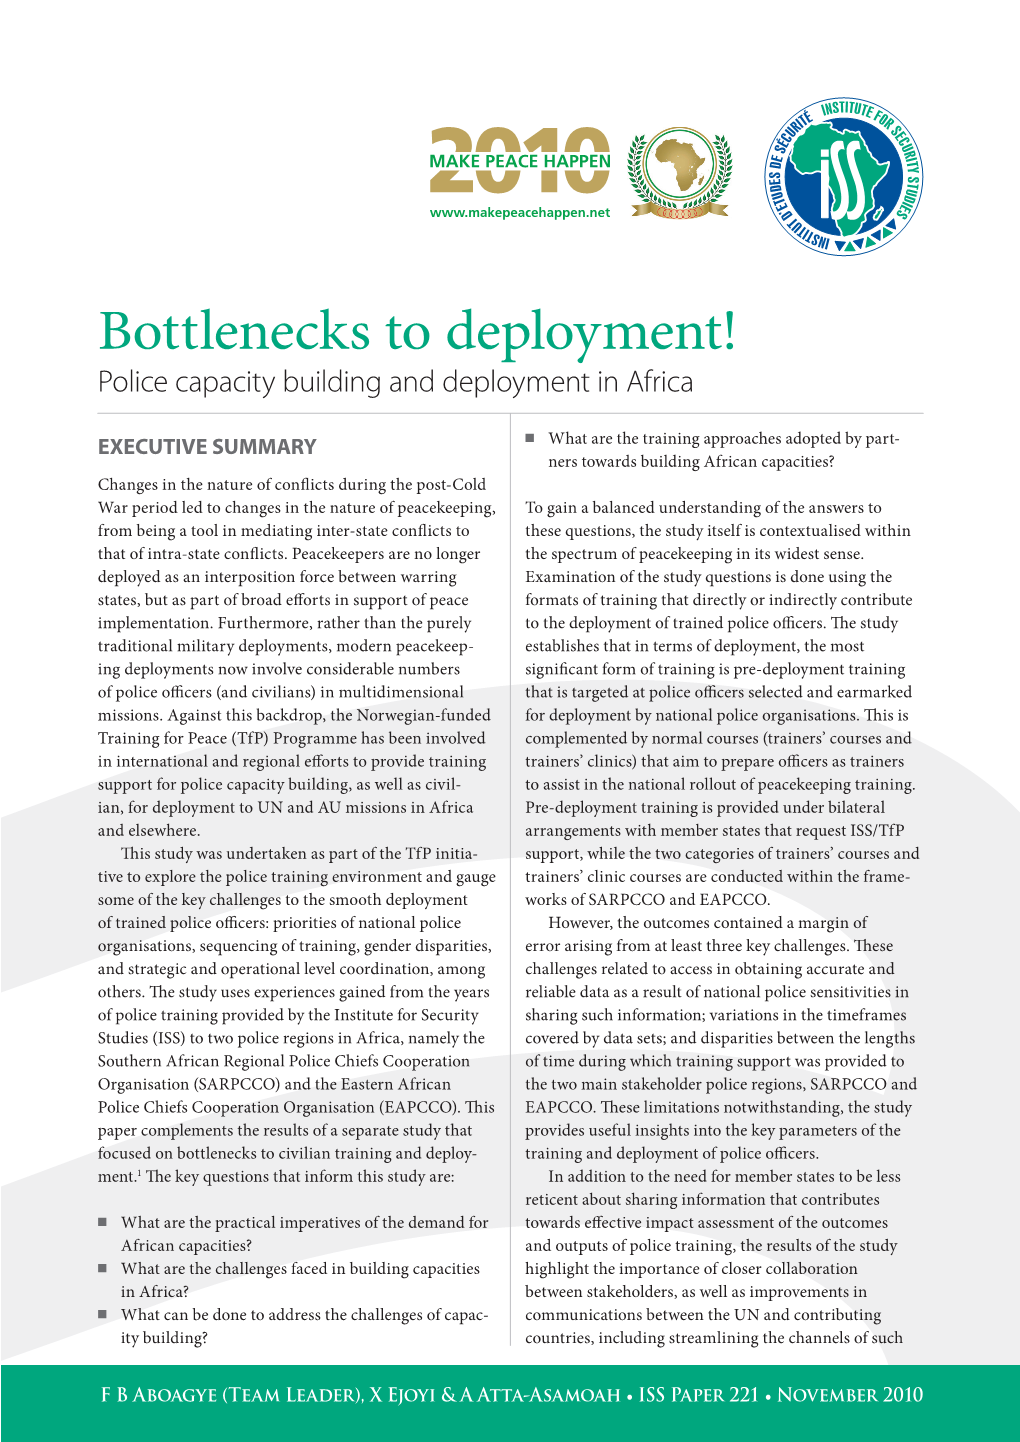 Bottlenecks to Deployment! Police Capacity Building and Deployment in Africa